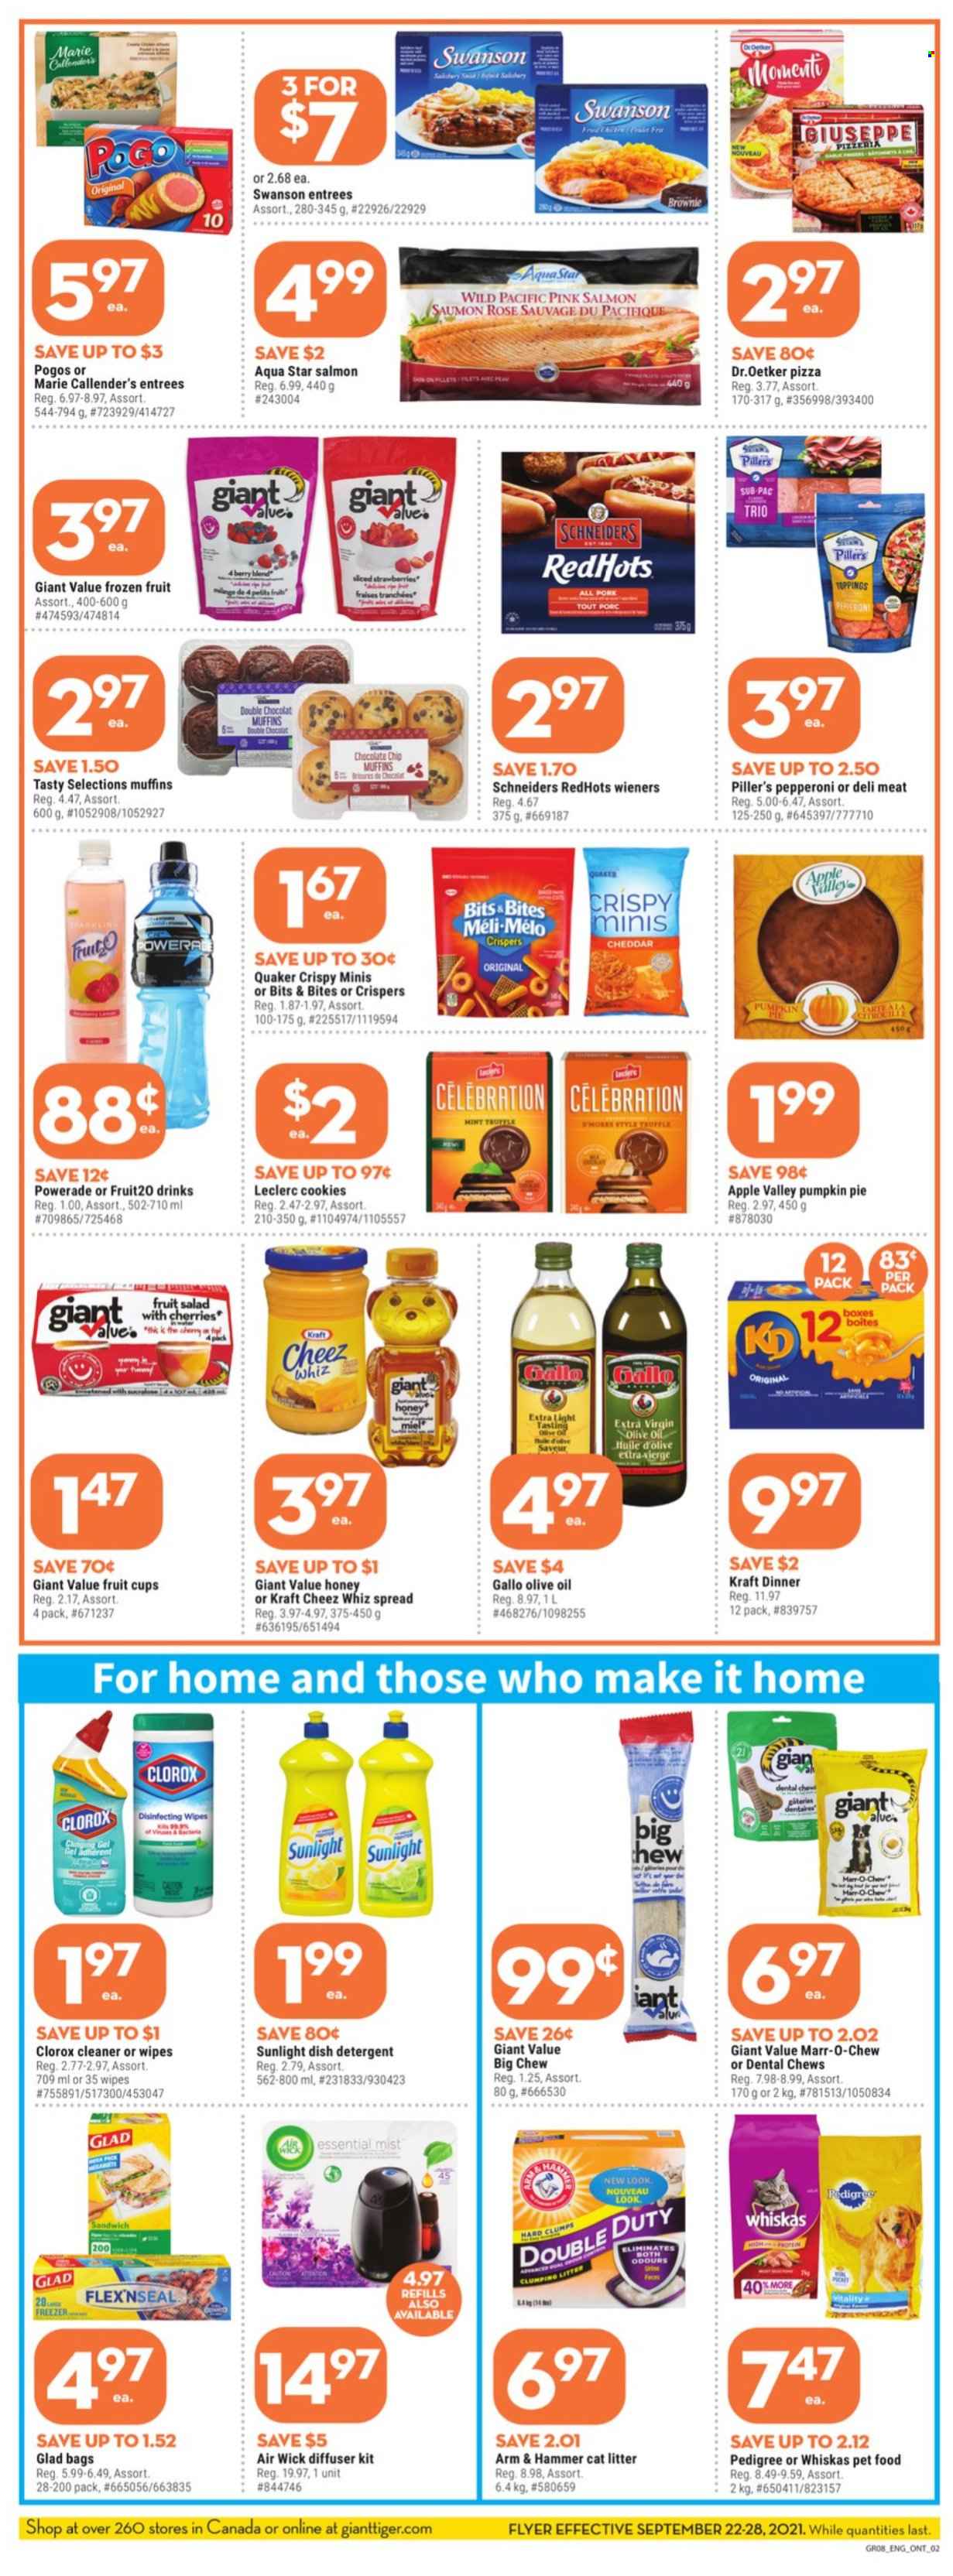 thumbnail - Giant Tiger Flyer - September 22, 2021 - September 28, 2021 - Sales products - pie, brownies, muffin, pumpkin, salad, fruit cup, salmon, pizza, sandwich, Quaker, Marie Callender's, Kraft®, pepperoni, cheddar, Dr. Oetker, cookies, truffles, Celebration, chewing gum, ARM & HAMMER, fruit salad, extra virgin olive oil, olive oil, oil, Powerade, wine, rosé wine, wipes, cleaner, Clorox, Sunlight, bag, diffuser, Air Wick, cat litter, dental chews, animal food, Pedigree, freezer, rose, detergent, Whiskas. Page 3.